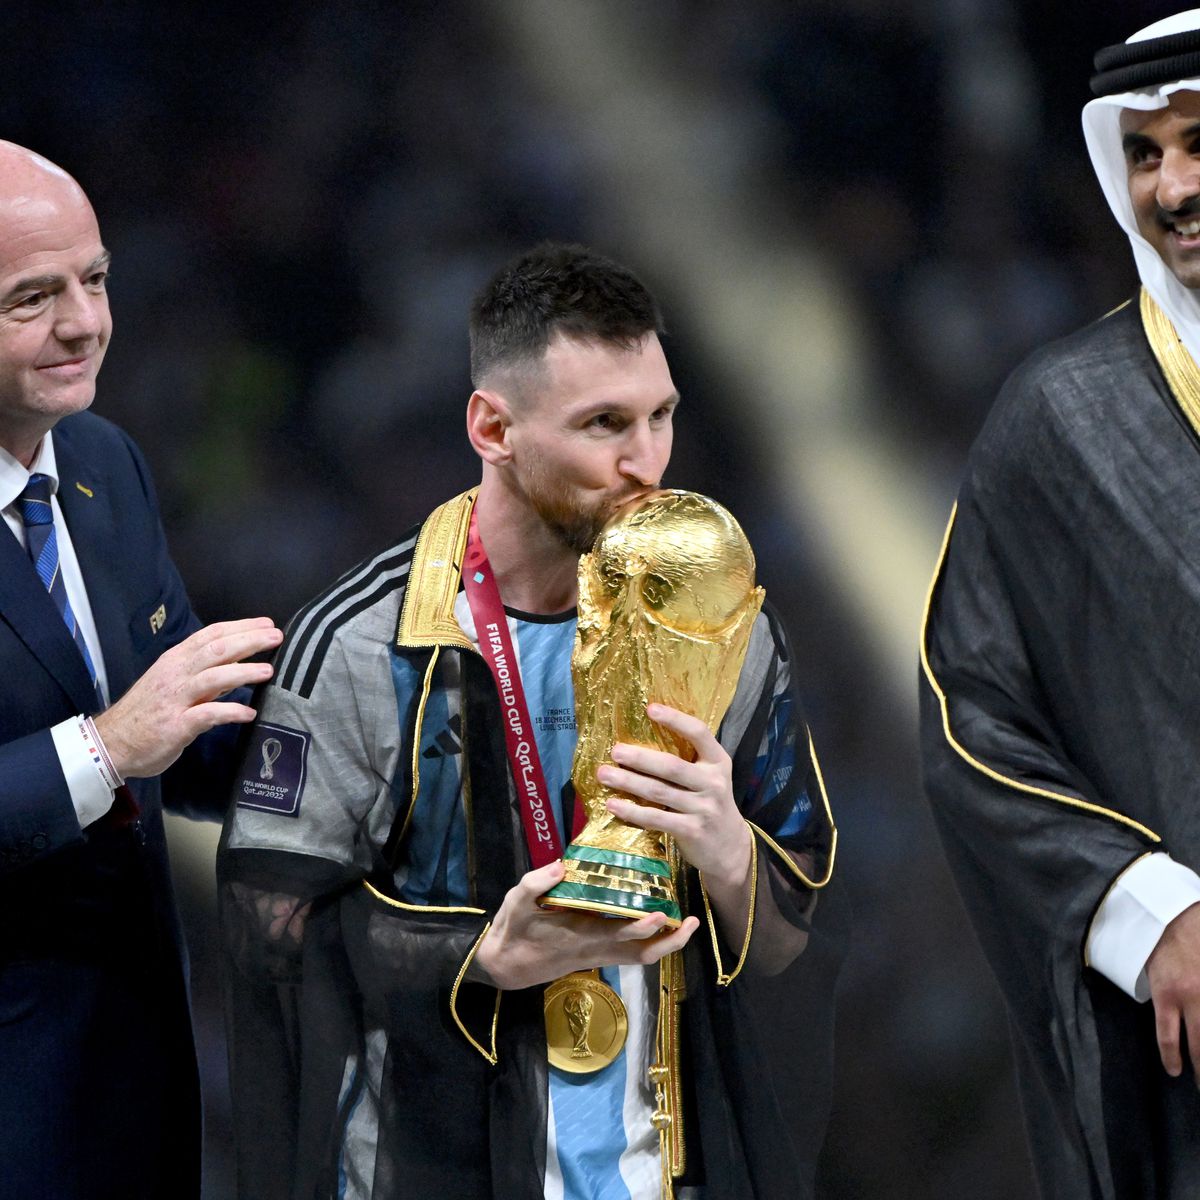 FIFA World Cup 2022 final: Lionel Messi robe photo at Argentina trophy presentation